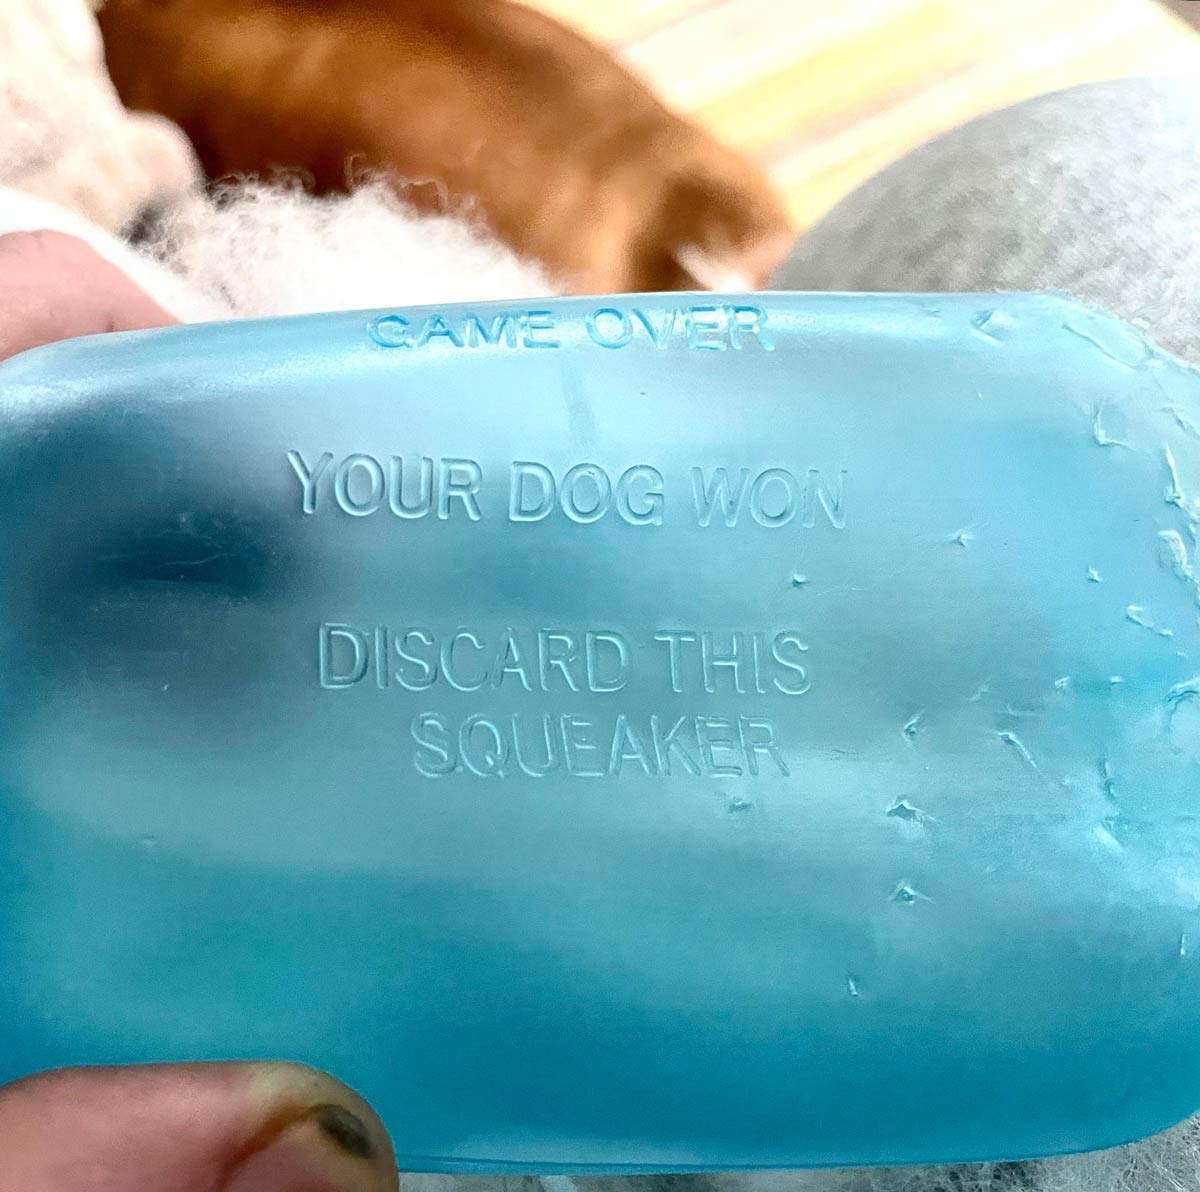 Found on the inside of a dog toy